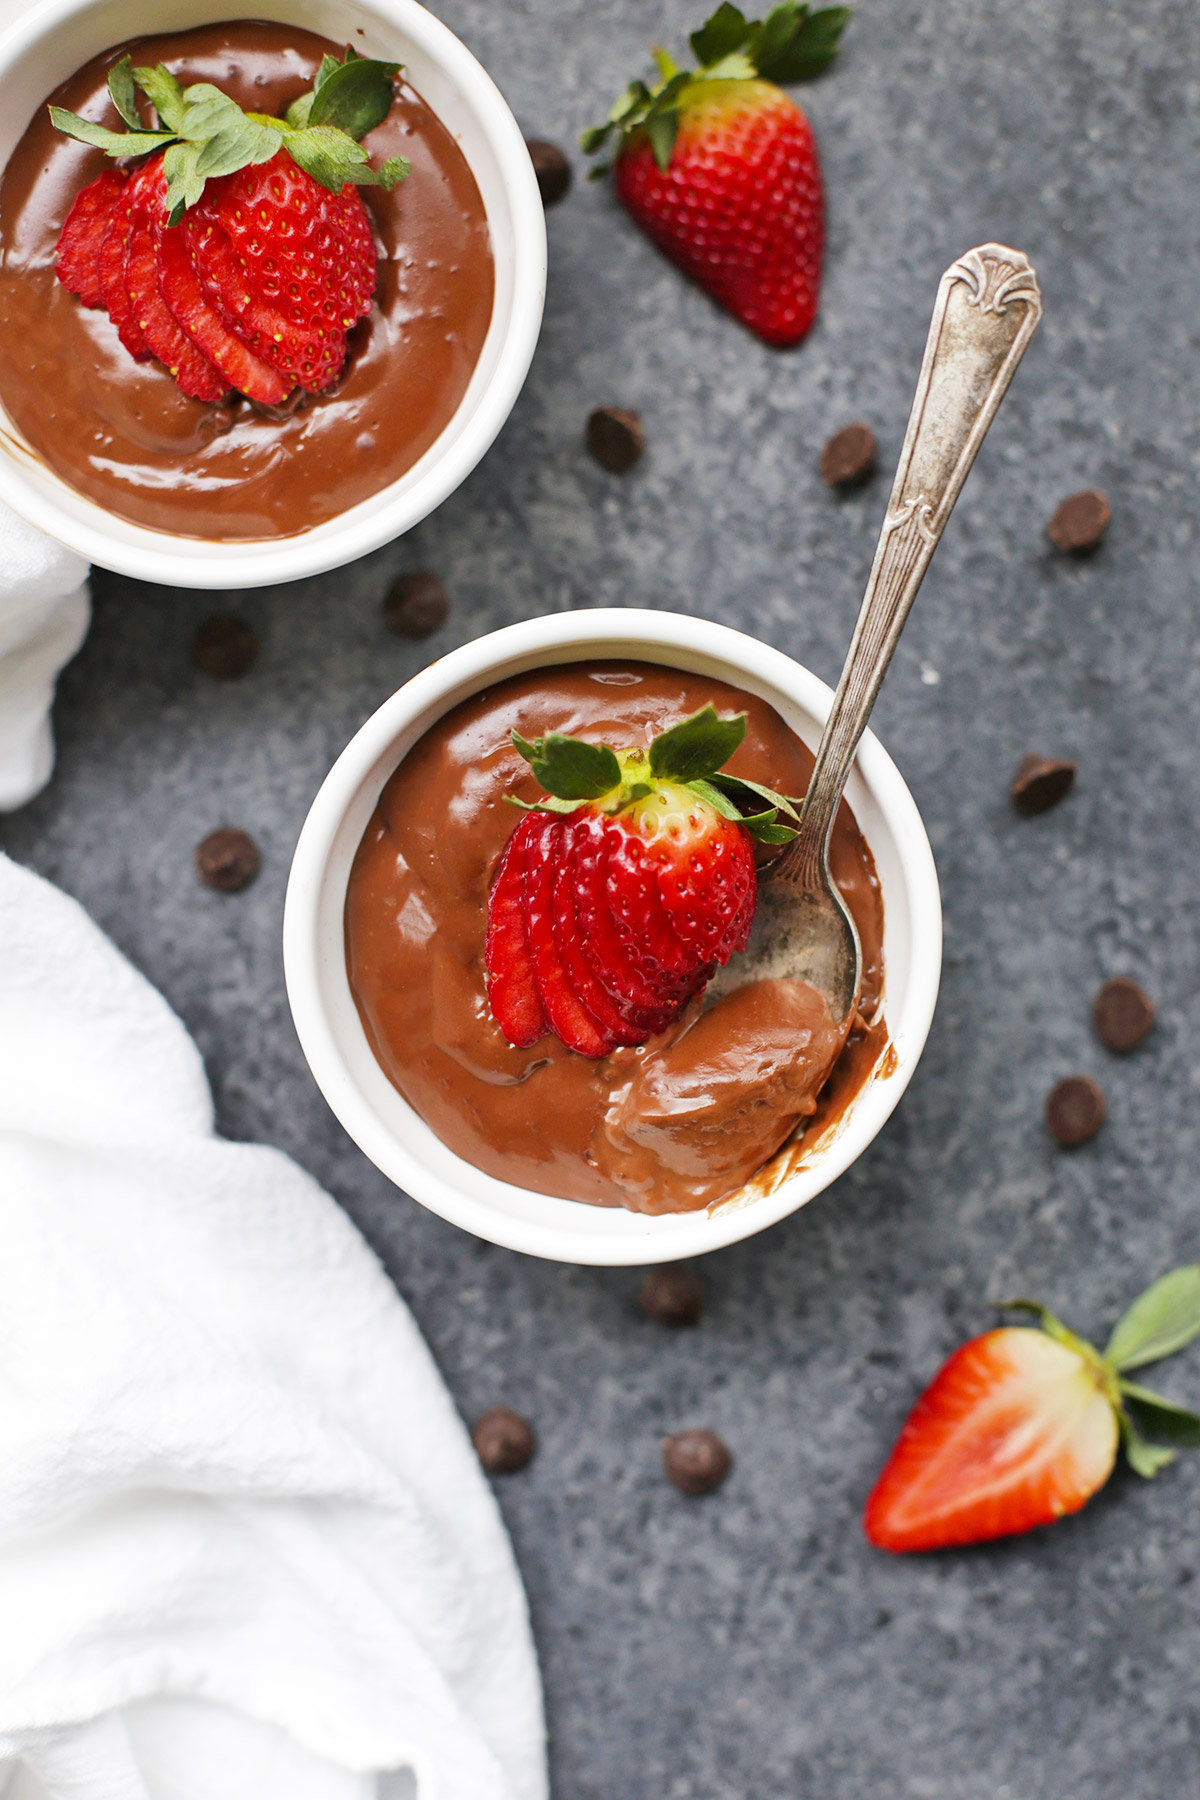 Dairy Free, Vegan Chocolate Pudding from One Lovely Life